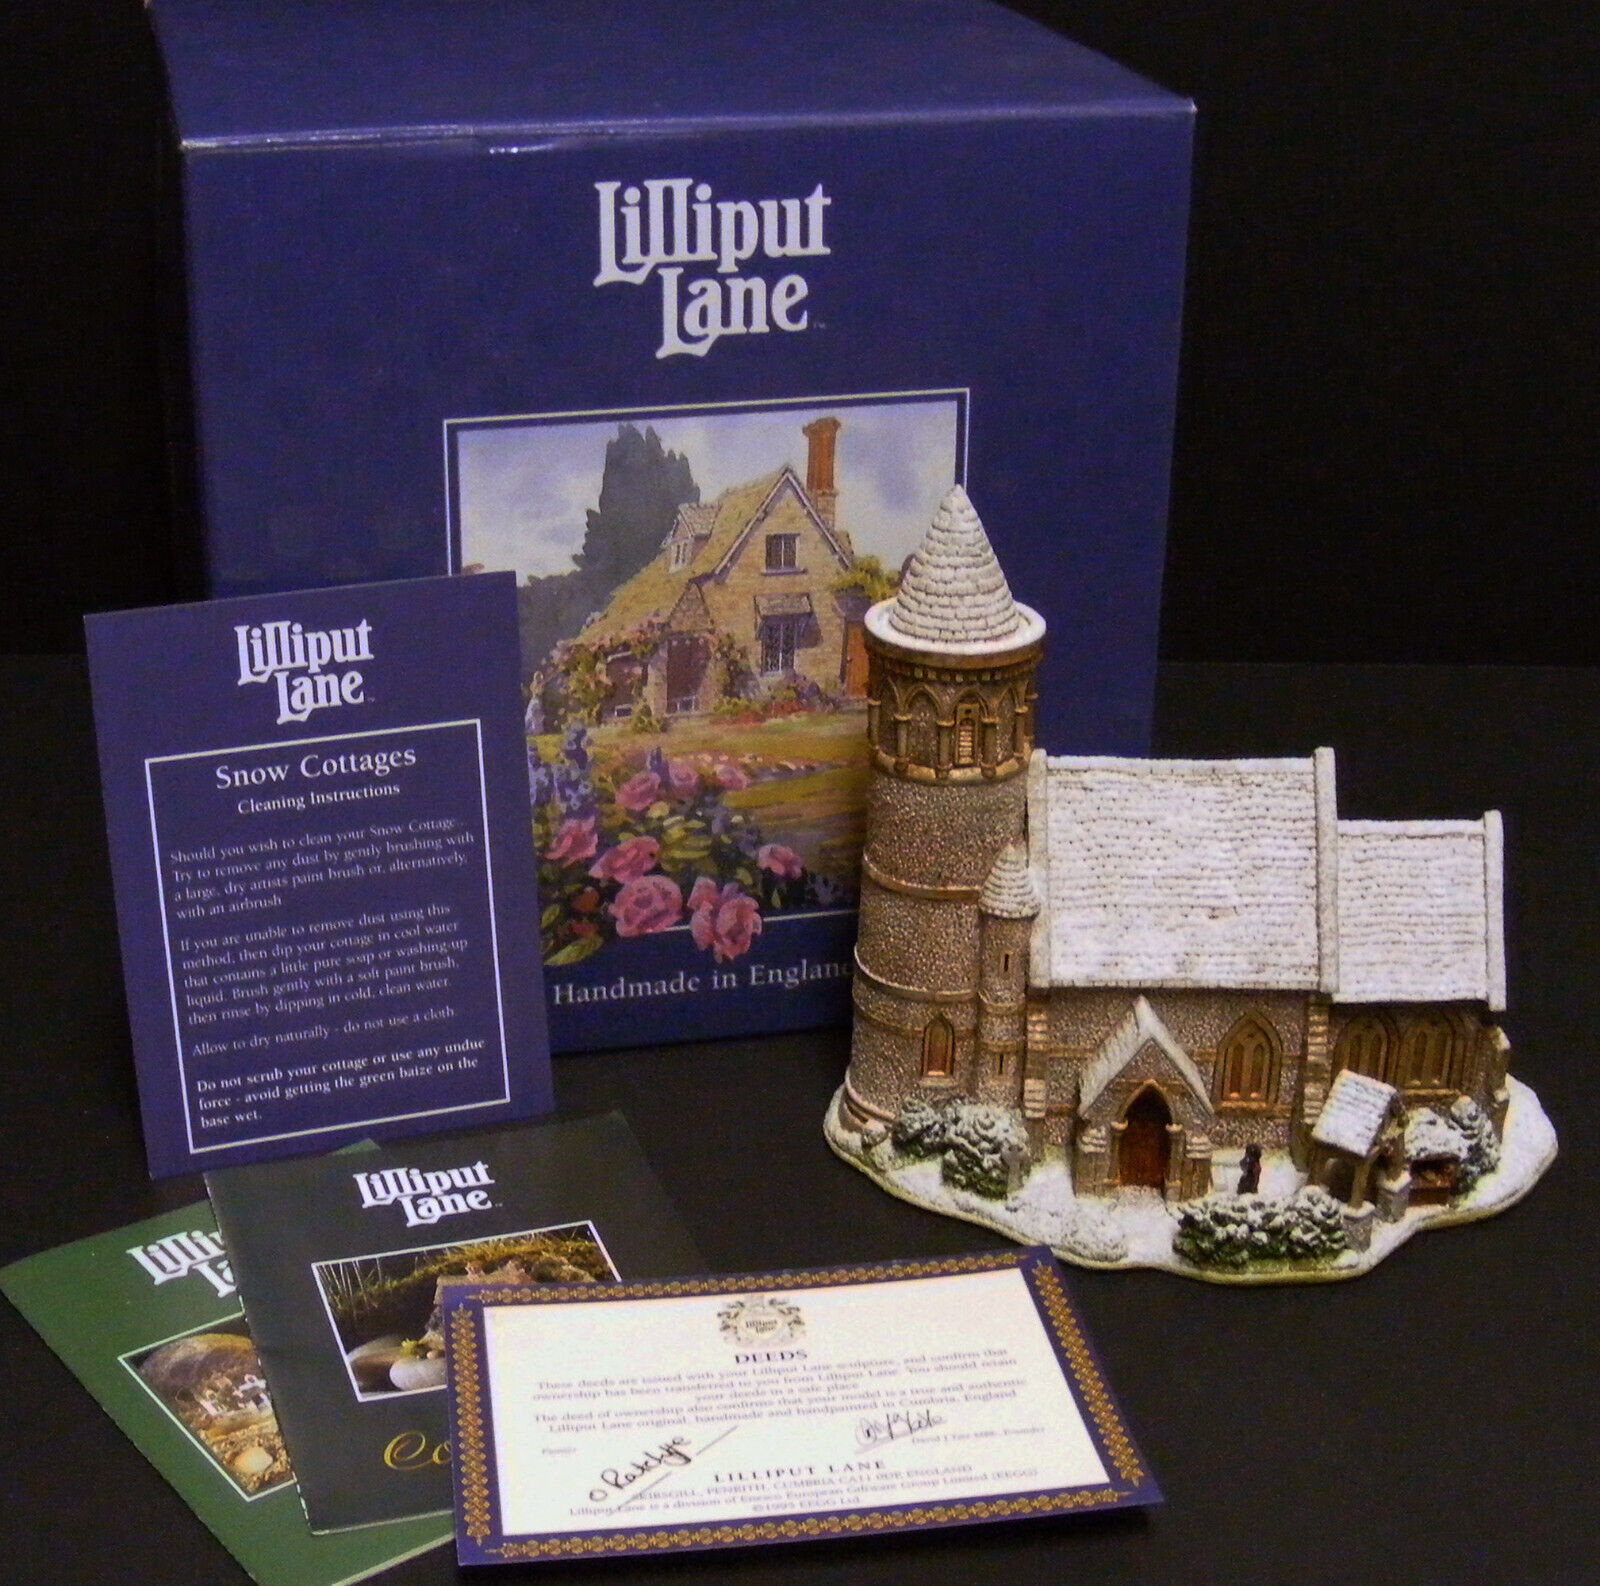 ST STEPHEN'S CHURCH - a Lilliput Lane Cottage - a Christmas Special © 1996 - $95.00